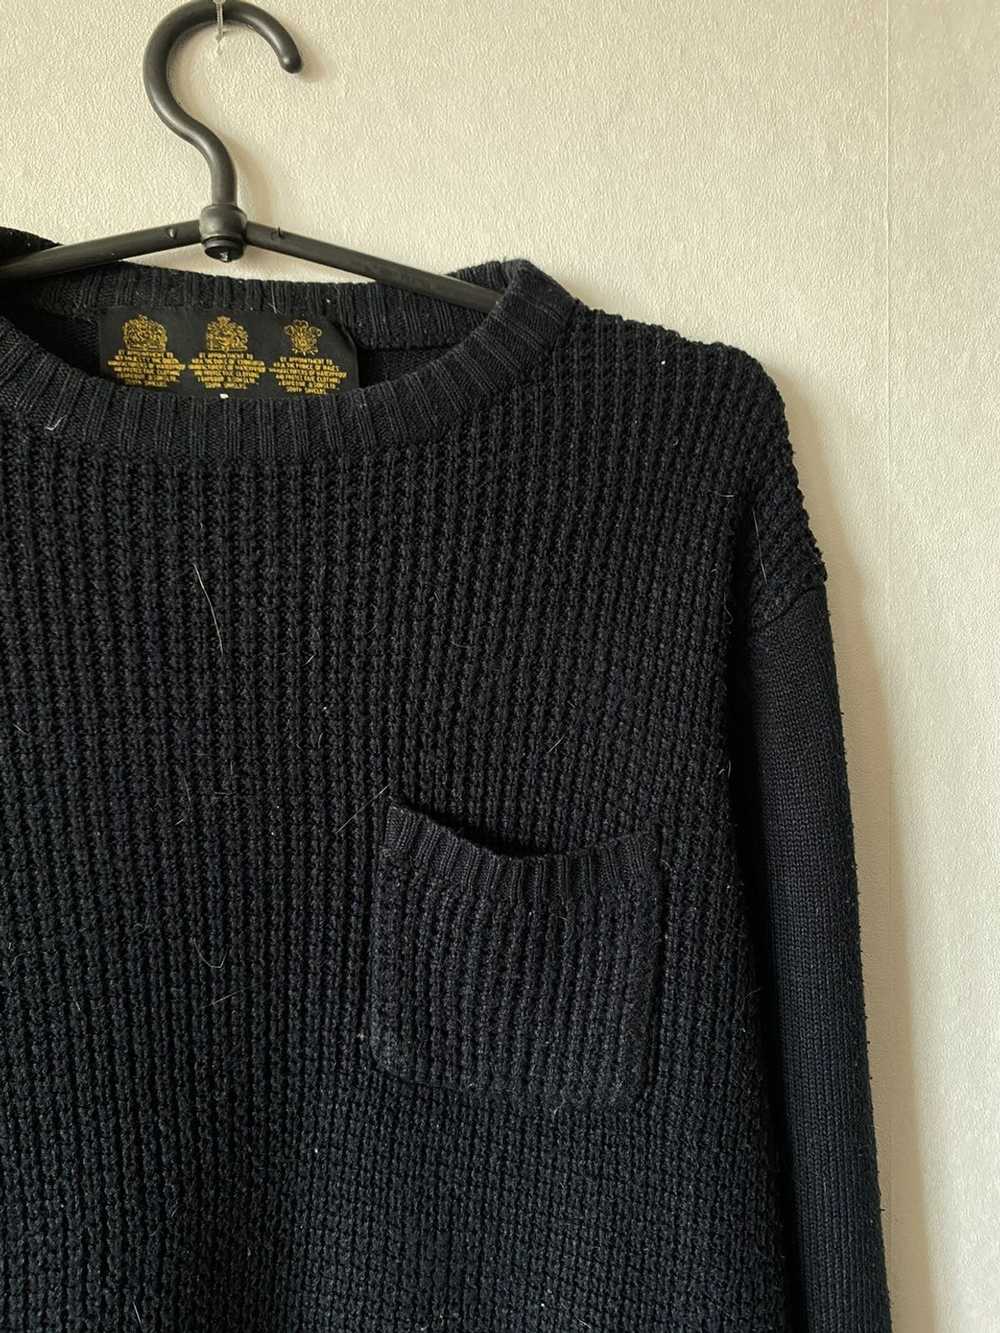 Barbour × Luxury × Vintage Barbour knit sweater - image 2